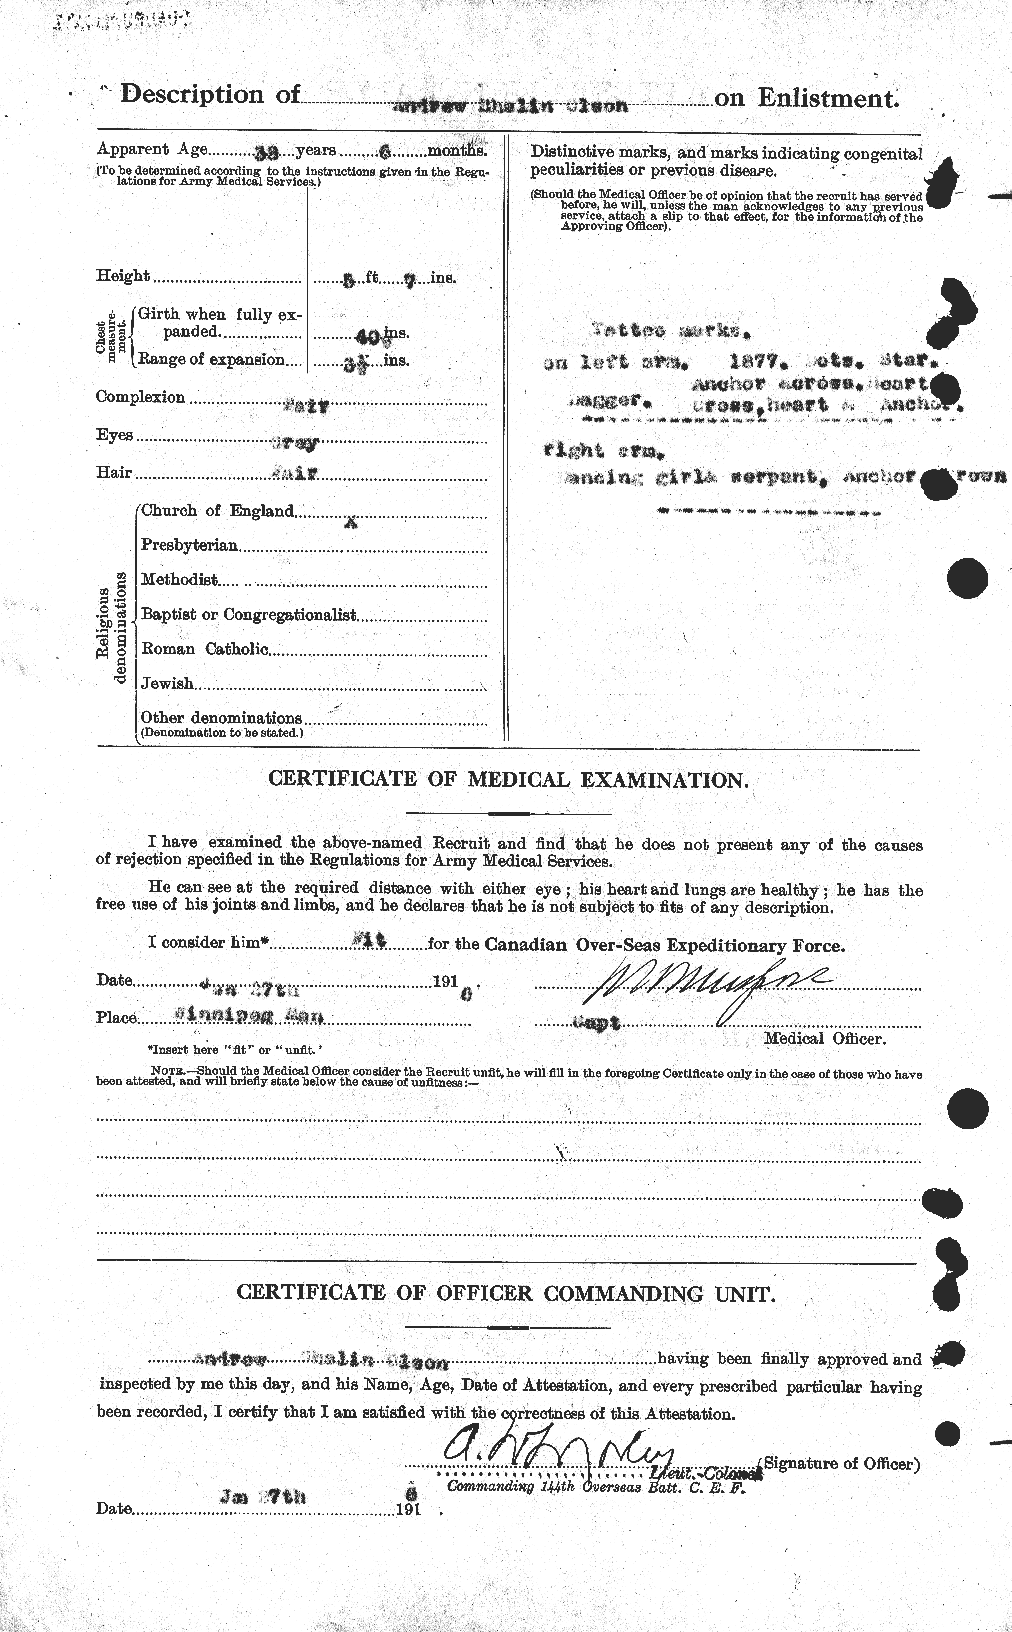 Personnel Records of the First World War - CEF 557140b